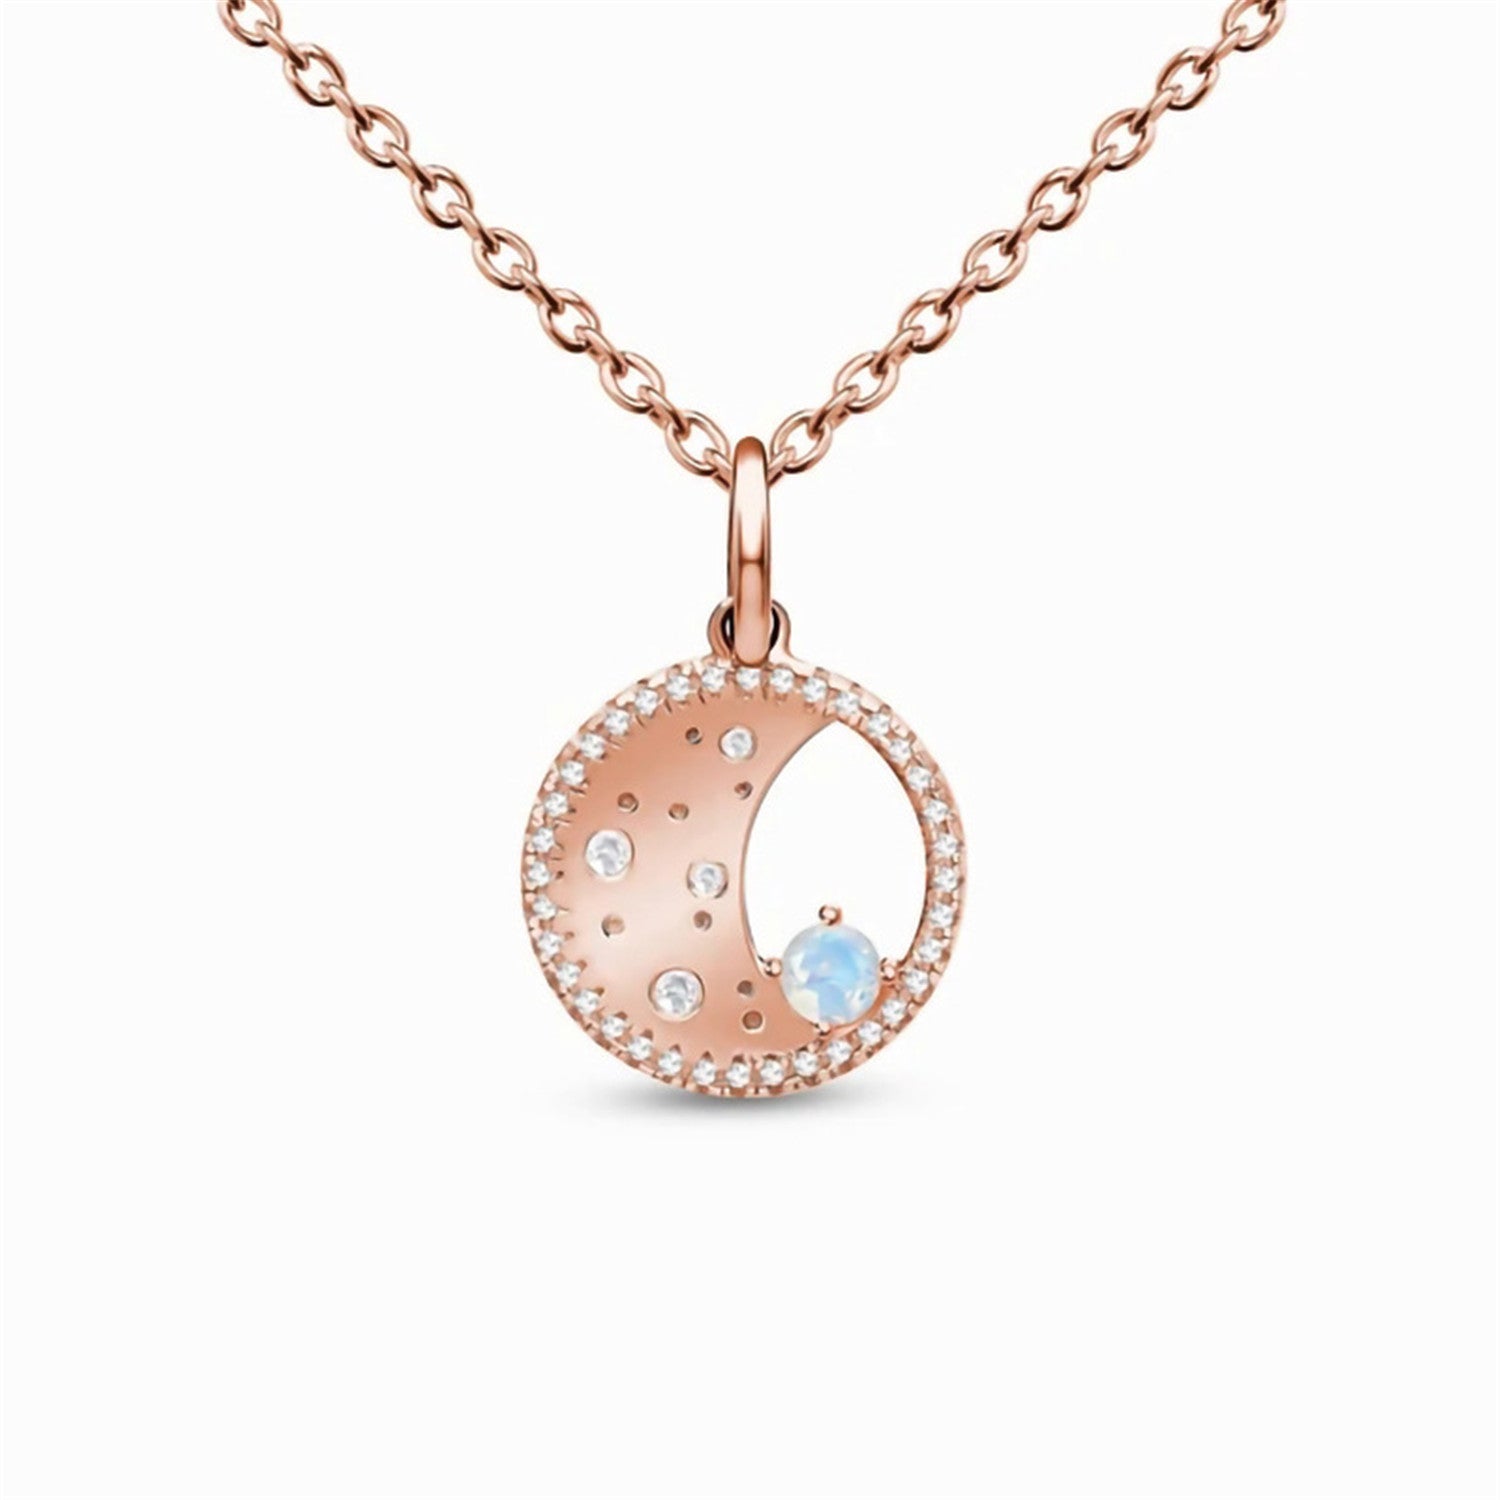 Moonstone Pendant,s925 Silver,With Hollowed Out Medallion Design